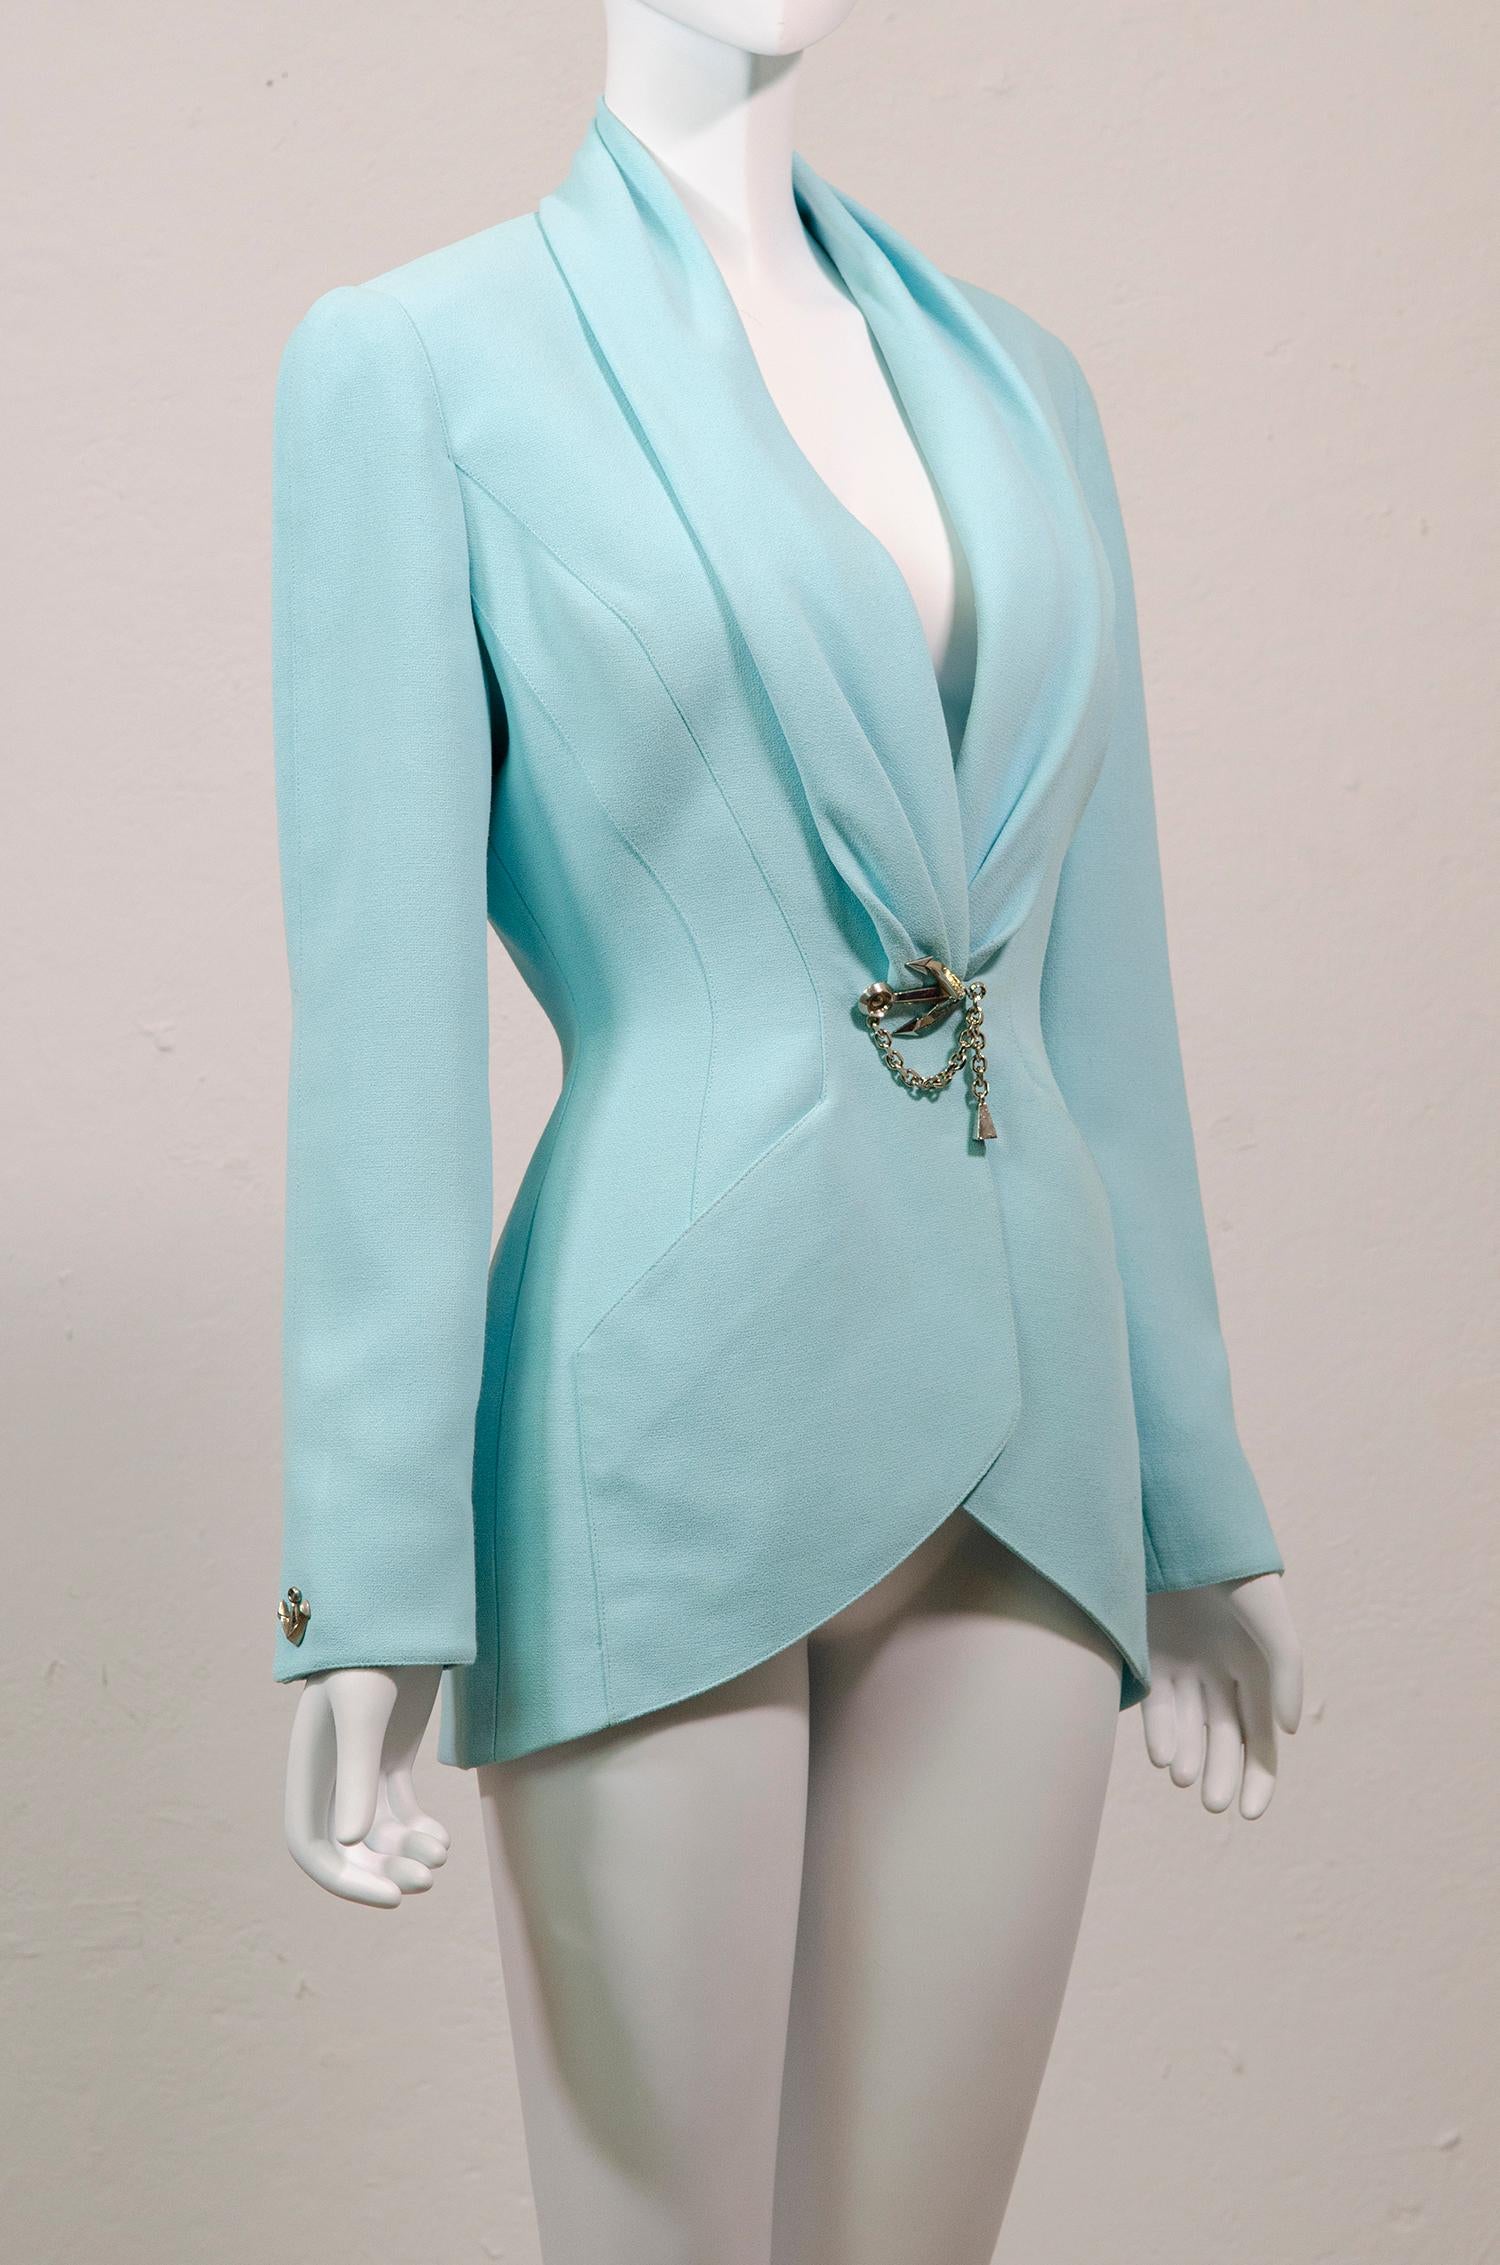 Amazing vintage Thierry Mugler pastel blue jacket with nautical silver anchor details.

Thierry Mugler often revisited aquatic themes through out his collections, often featuring fin details on lapels and pockets, and of course most notably in his